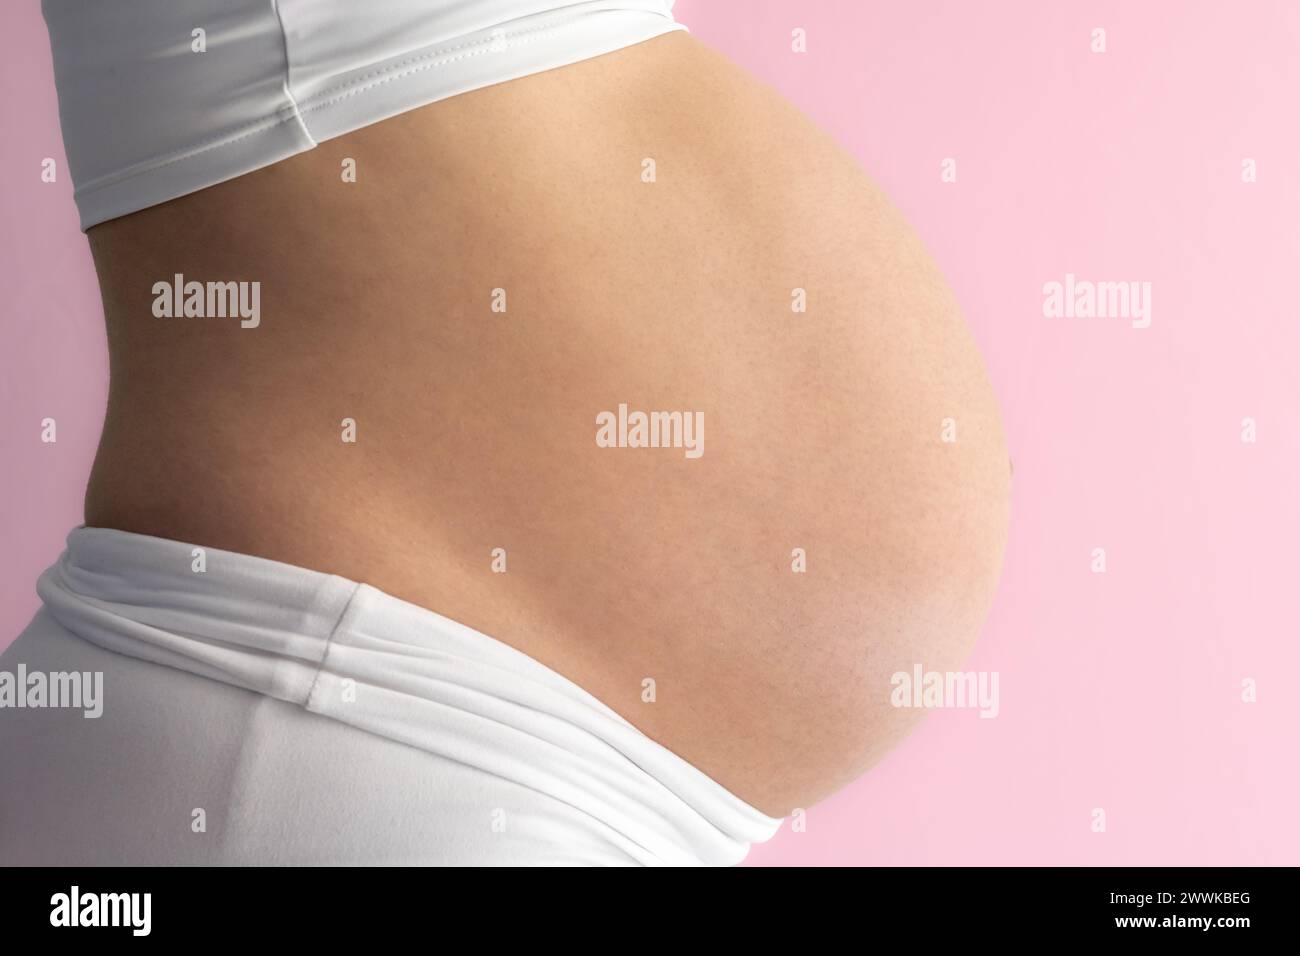 Description: Midsection of unrecognizable standing mother with very round pregnant baby belly. Side view. Pink background. Bright shot. Stock Photo